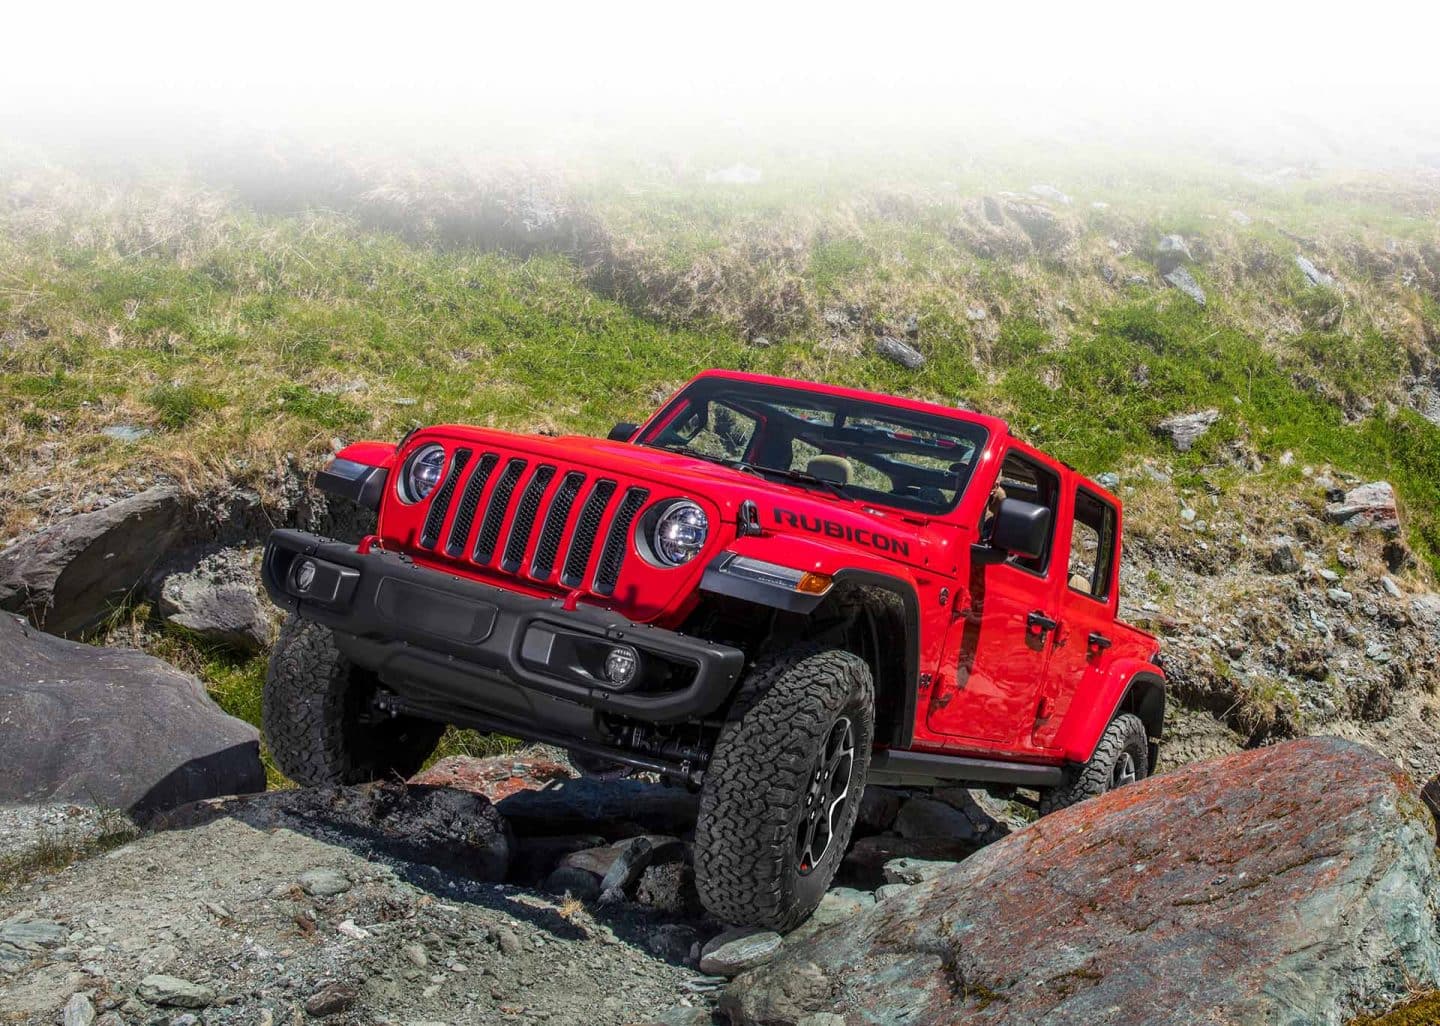 The 2023 Jeep Wrangler Rubicon being driven uphill on a steep, rocky slope.